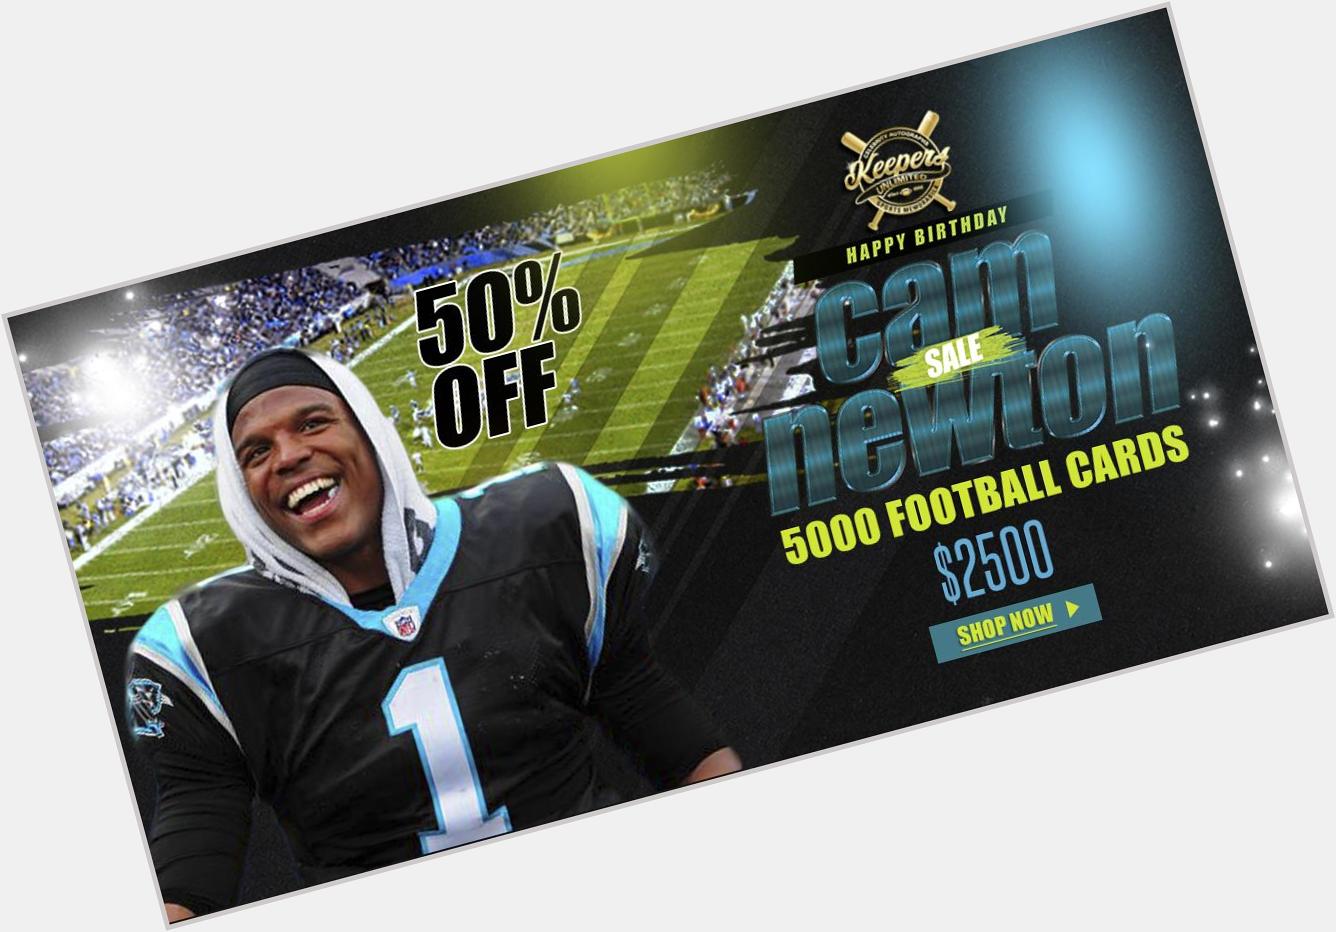 HAPPY BIRTHDAY TO CAM NEWTON! TAKE 50% OFF A 5000 FOOTBALL CARD LOT COLLECTION! 